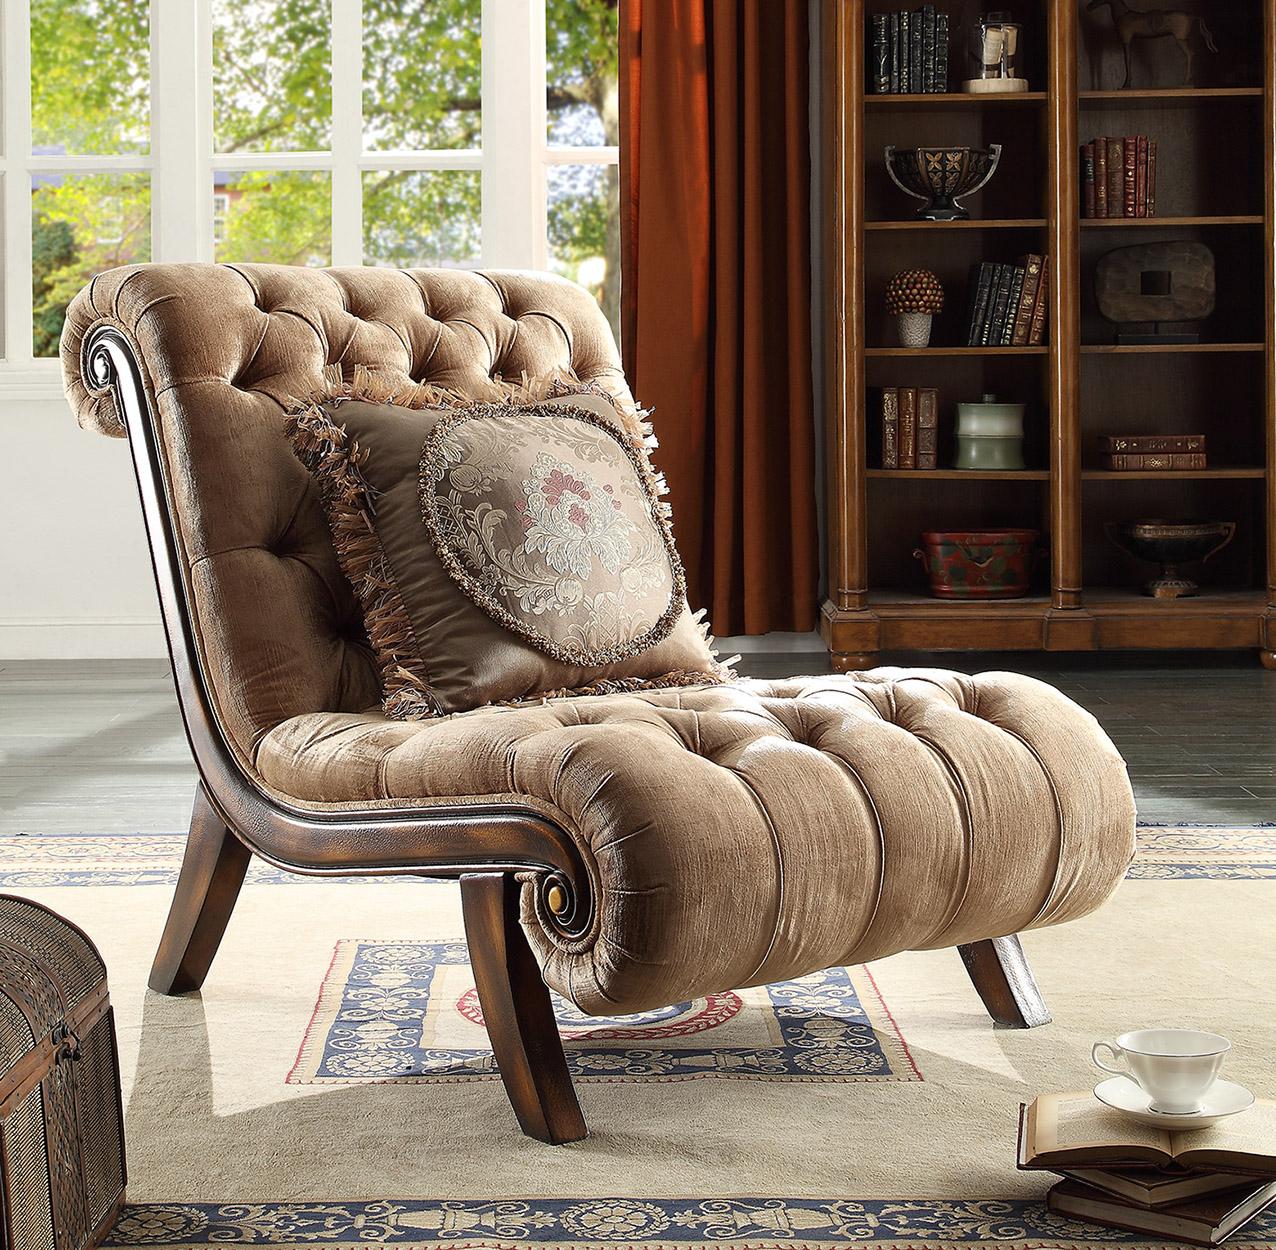 Traditional Armchair HD-1631 – CHAIR HD-C1631 in Mahogany, Beige Fabric